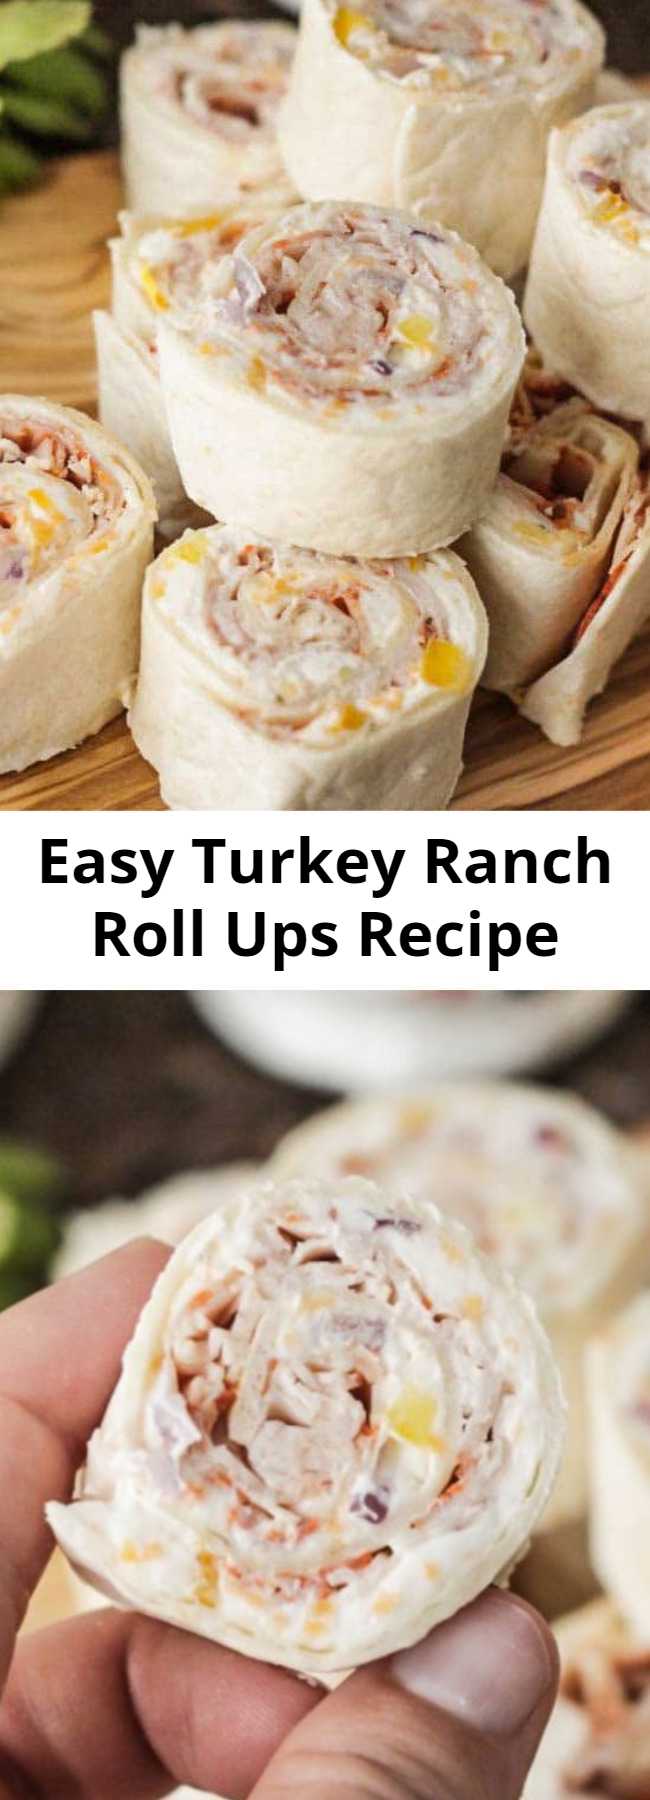 Easy Turkey Ranch Roll Ups Recipe - These creamy Turkey Ranch Tortilla Roll Ups are super easy, you can make them quickly, are packed with bold and tasty flavors, and just all around super delicious!  They are the perfect  appetizer for a party, but also great for a lunch box for school or work and make a great alternative to sandwich for busy weekdays when you want something a little more exciting to look forward to for lunch.